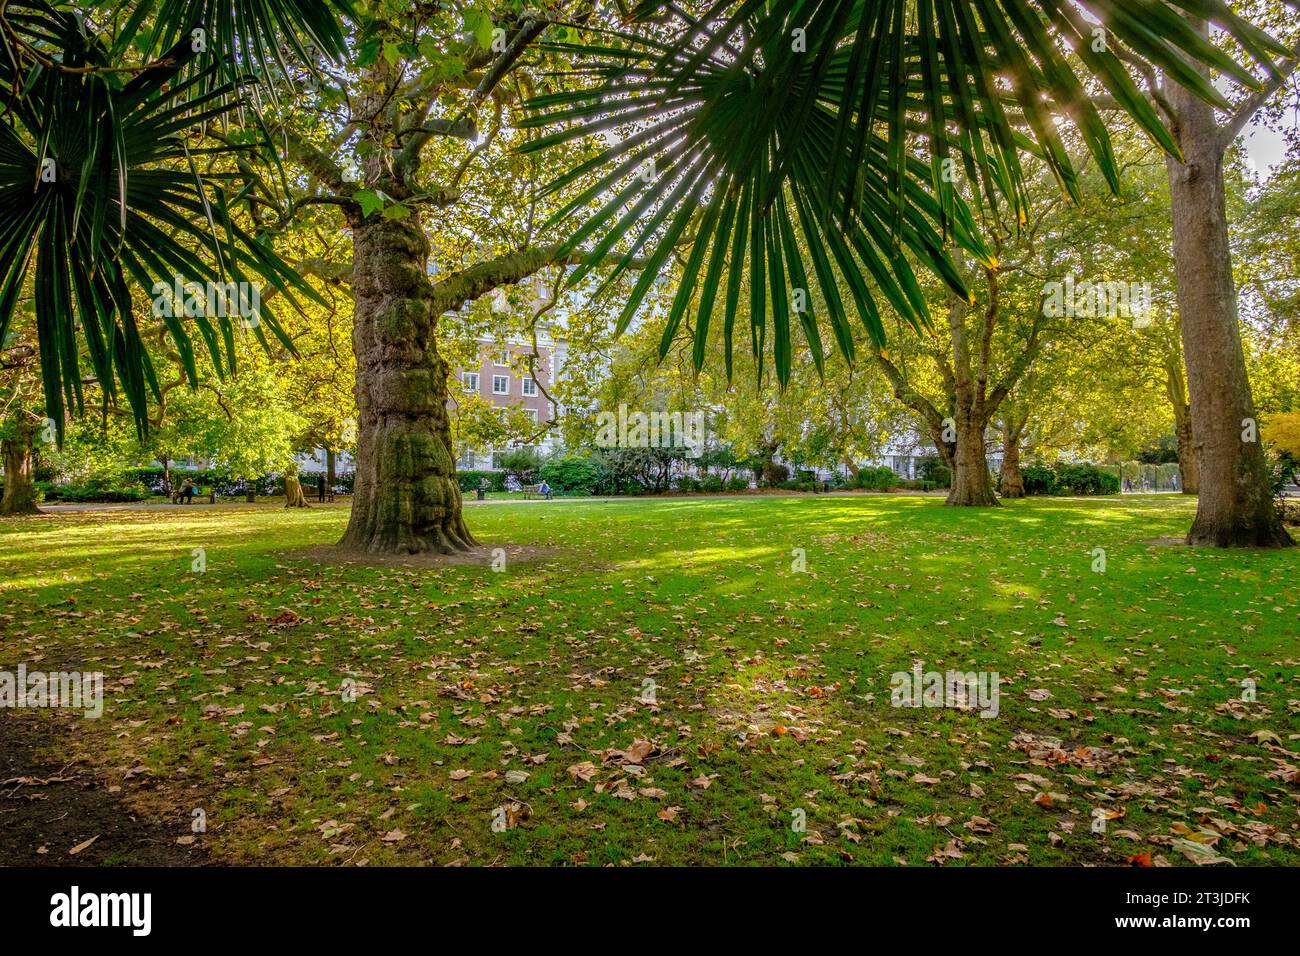 Lincoln's Inn Fields, London, UK Banque D'Images